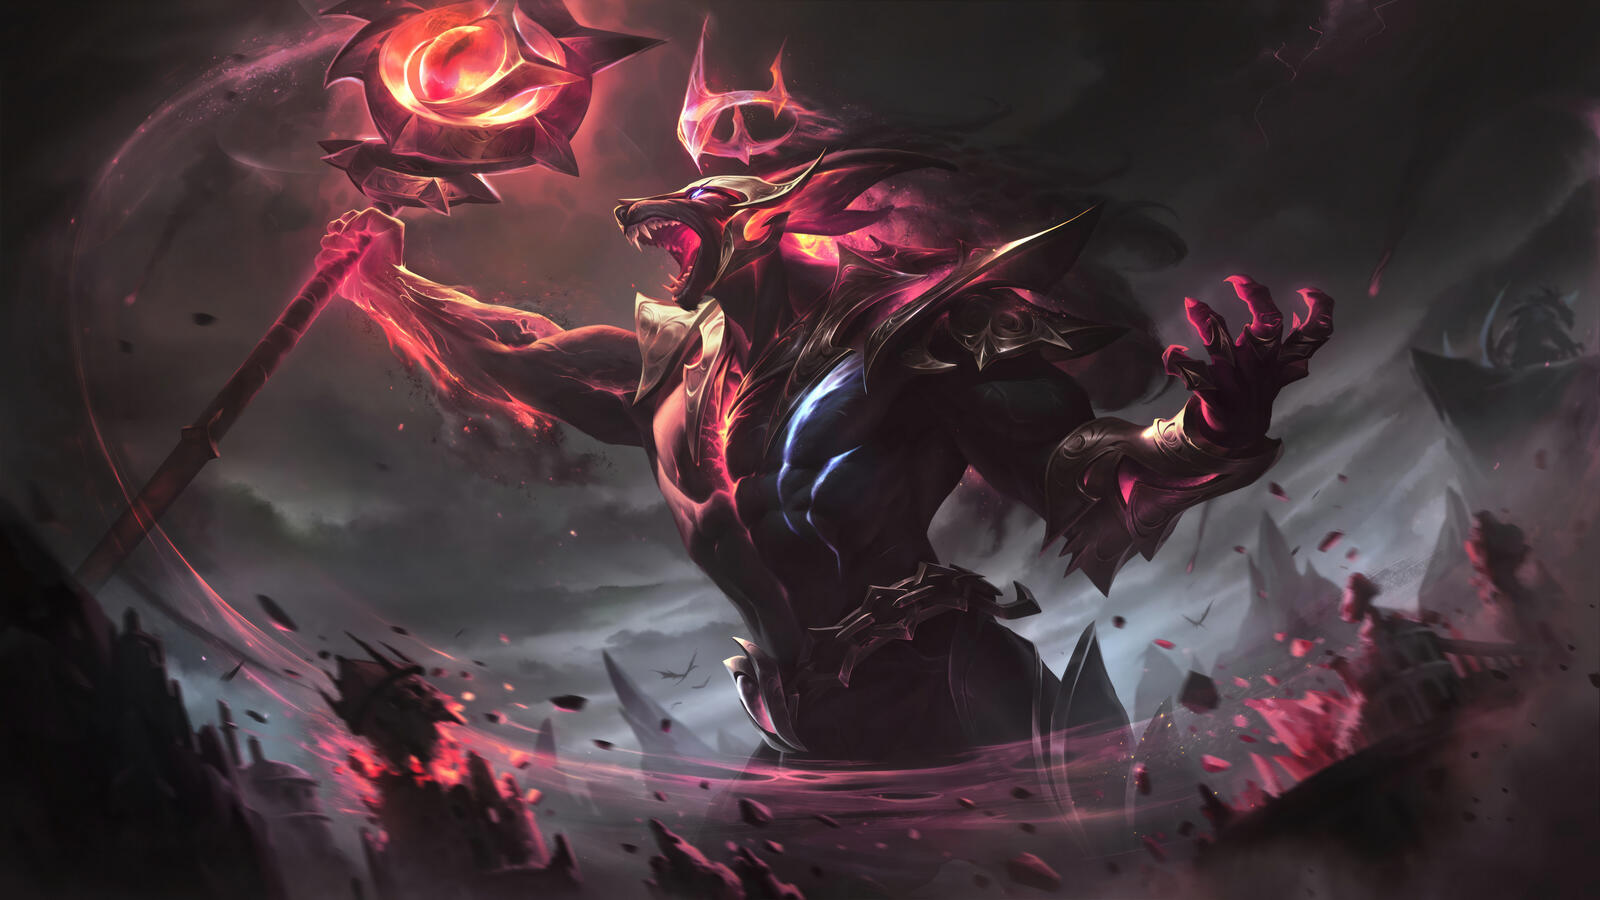 Free photo The demon from the game League Of Legends